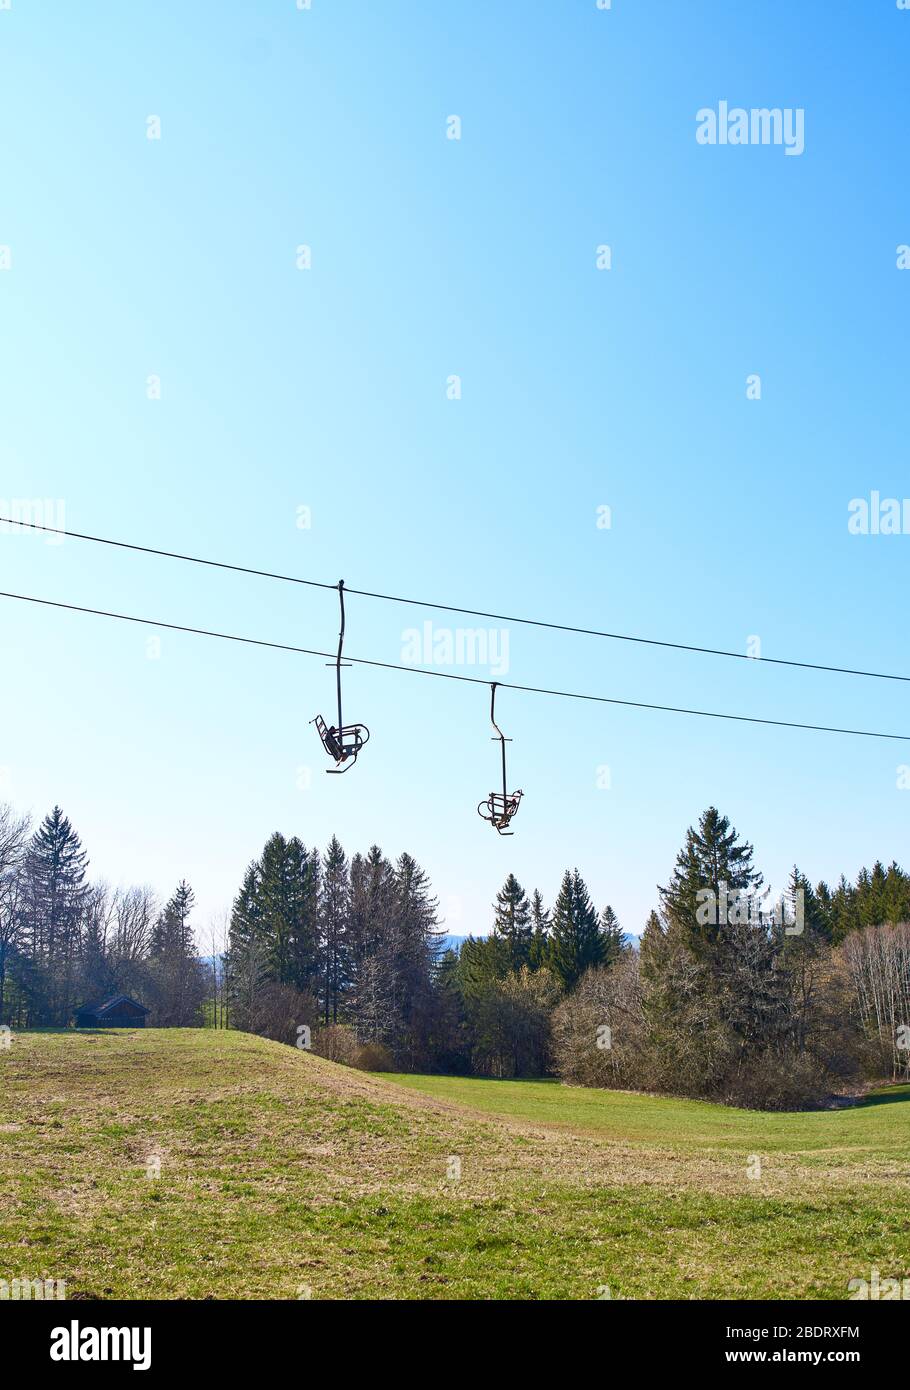 Nesselwang, Germany, April 08, 2020. A chairlift, cable car in spring time in the Alpspitzbahn ski arena  on April 08, 2020 in Nesselwang, Germany. © Peter Schatz / Alamy Live News Stock Photo